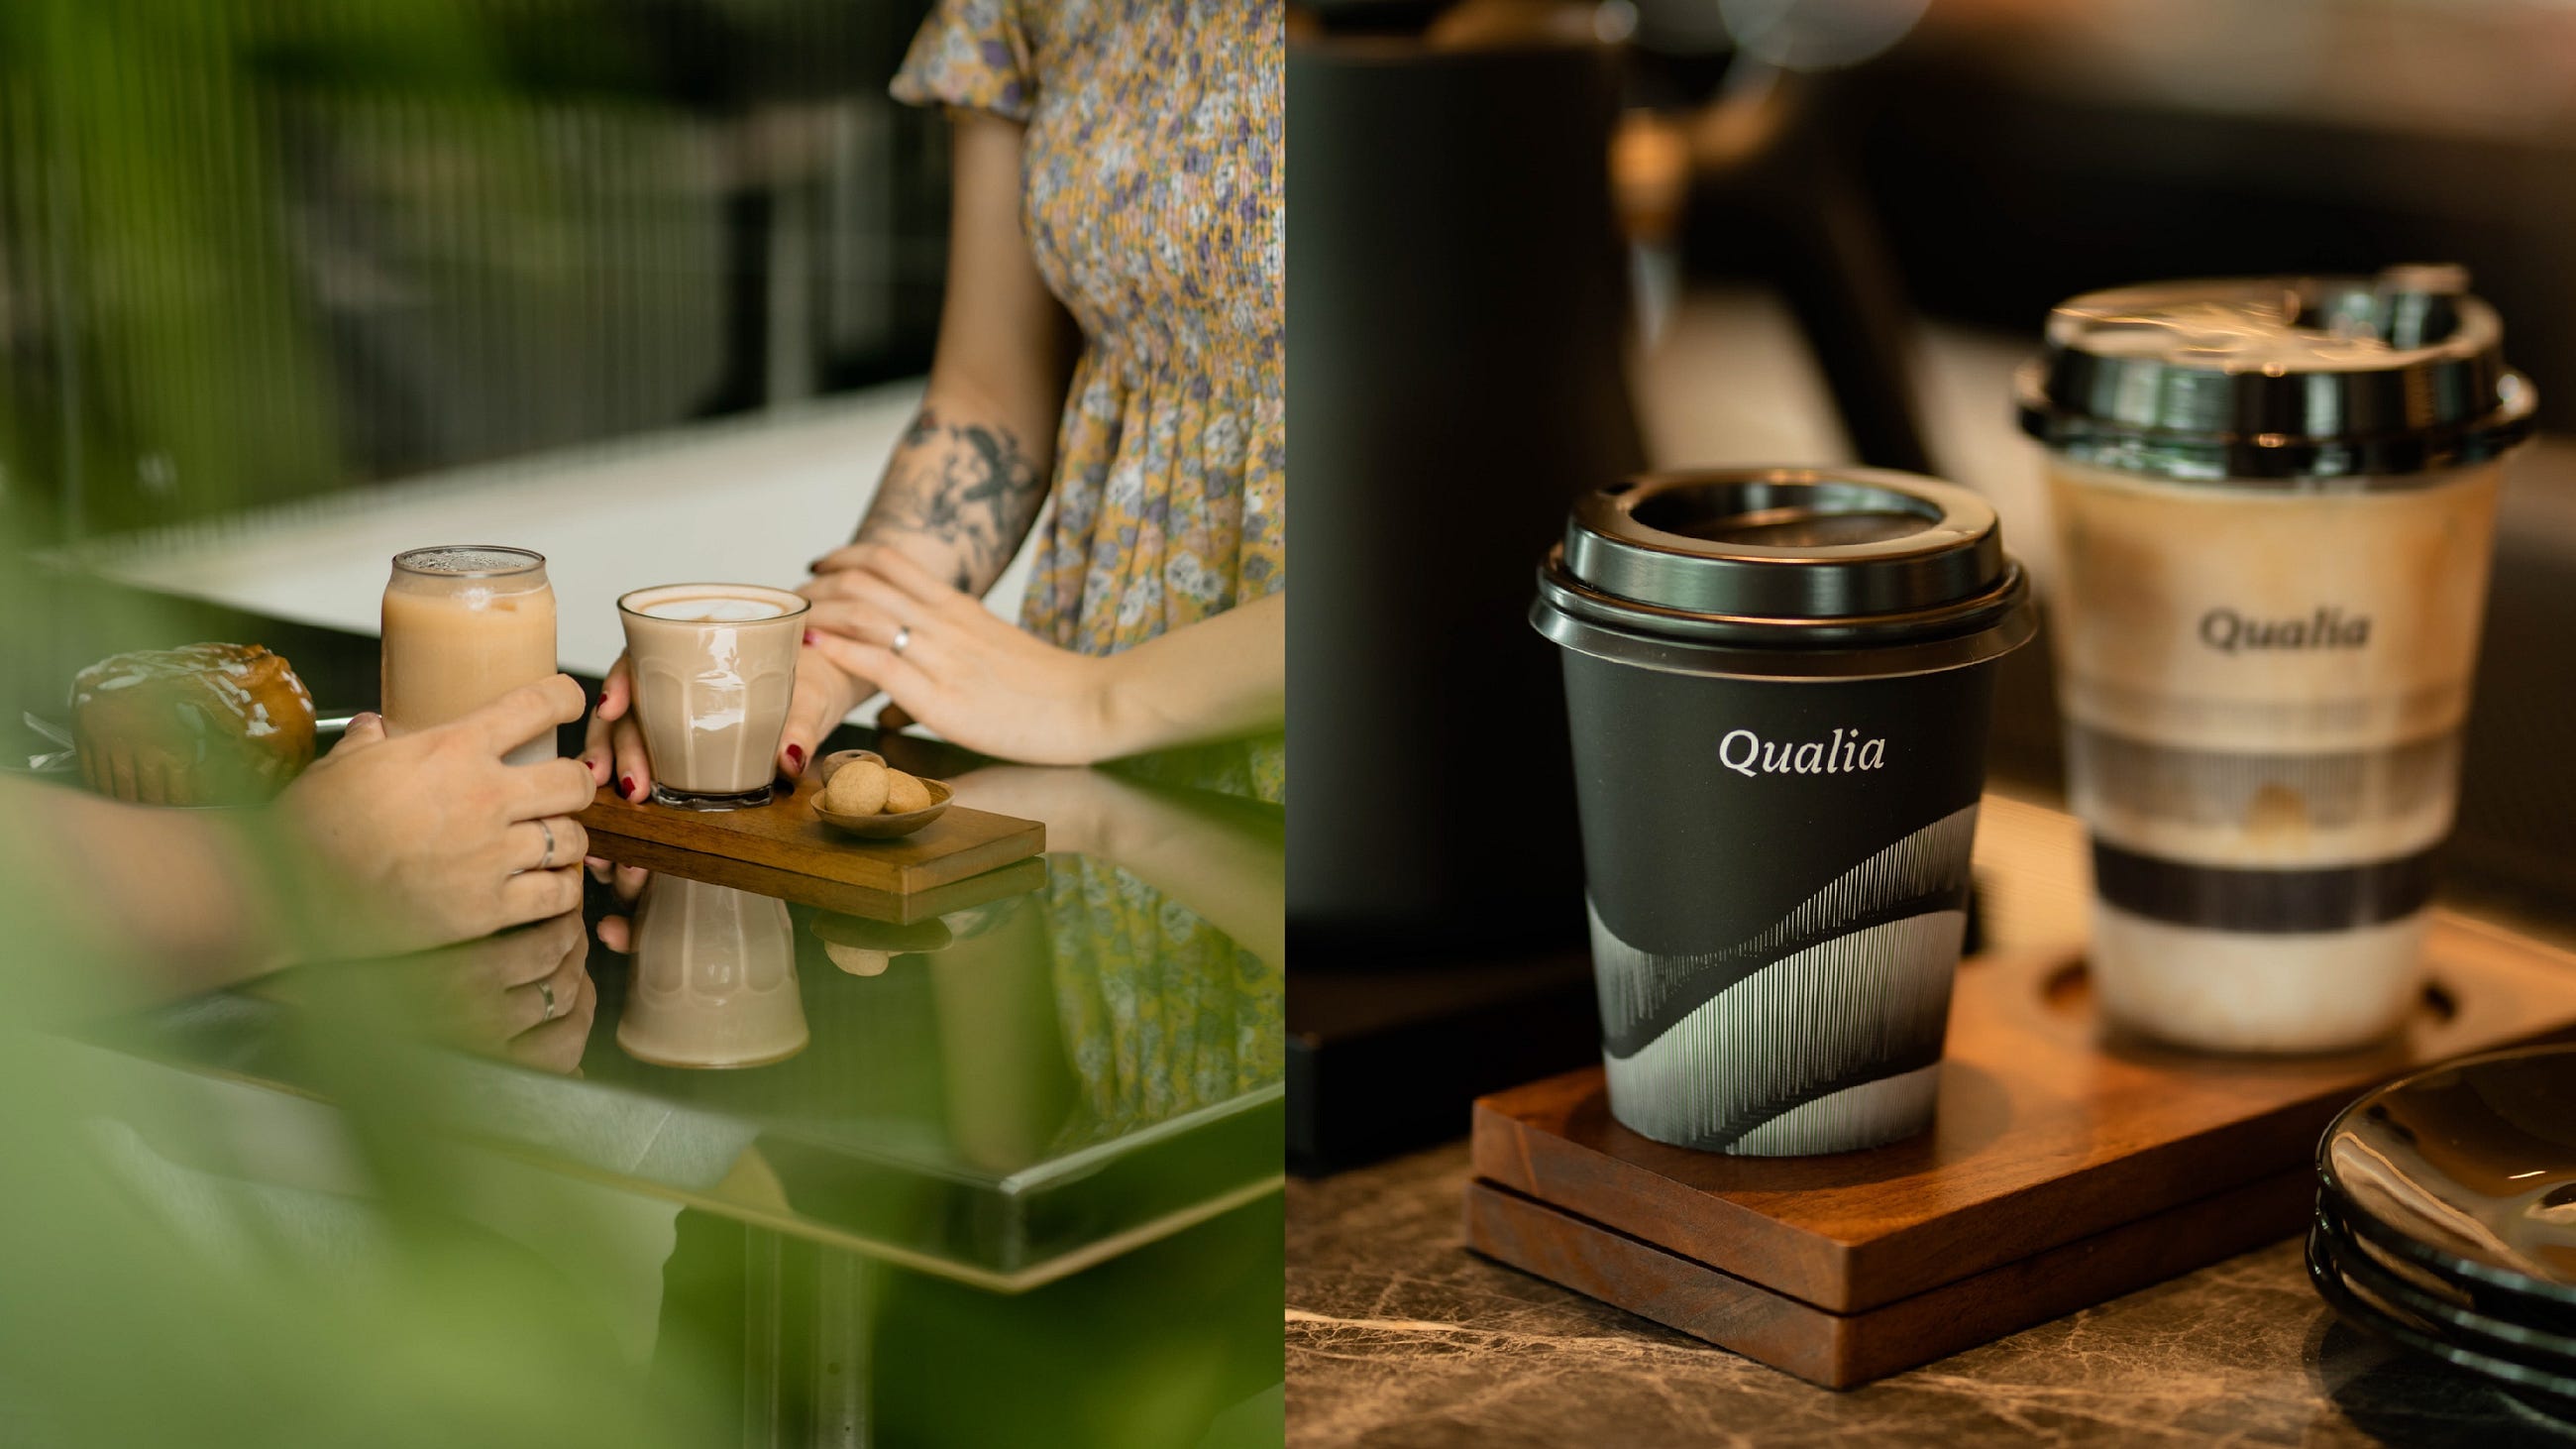 How We Build a Brand Identity for Coffee Shop that Celebrates Individuality